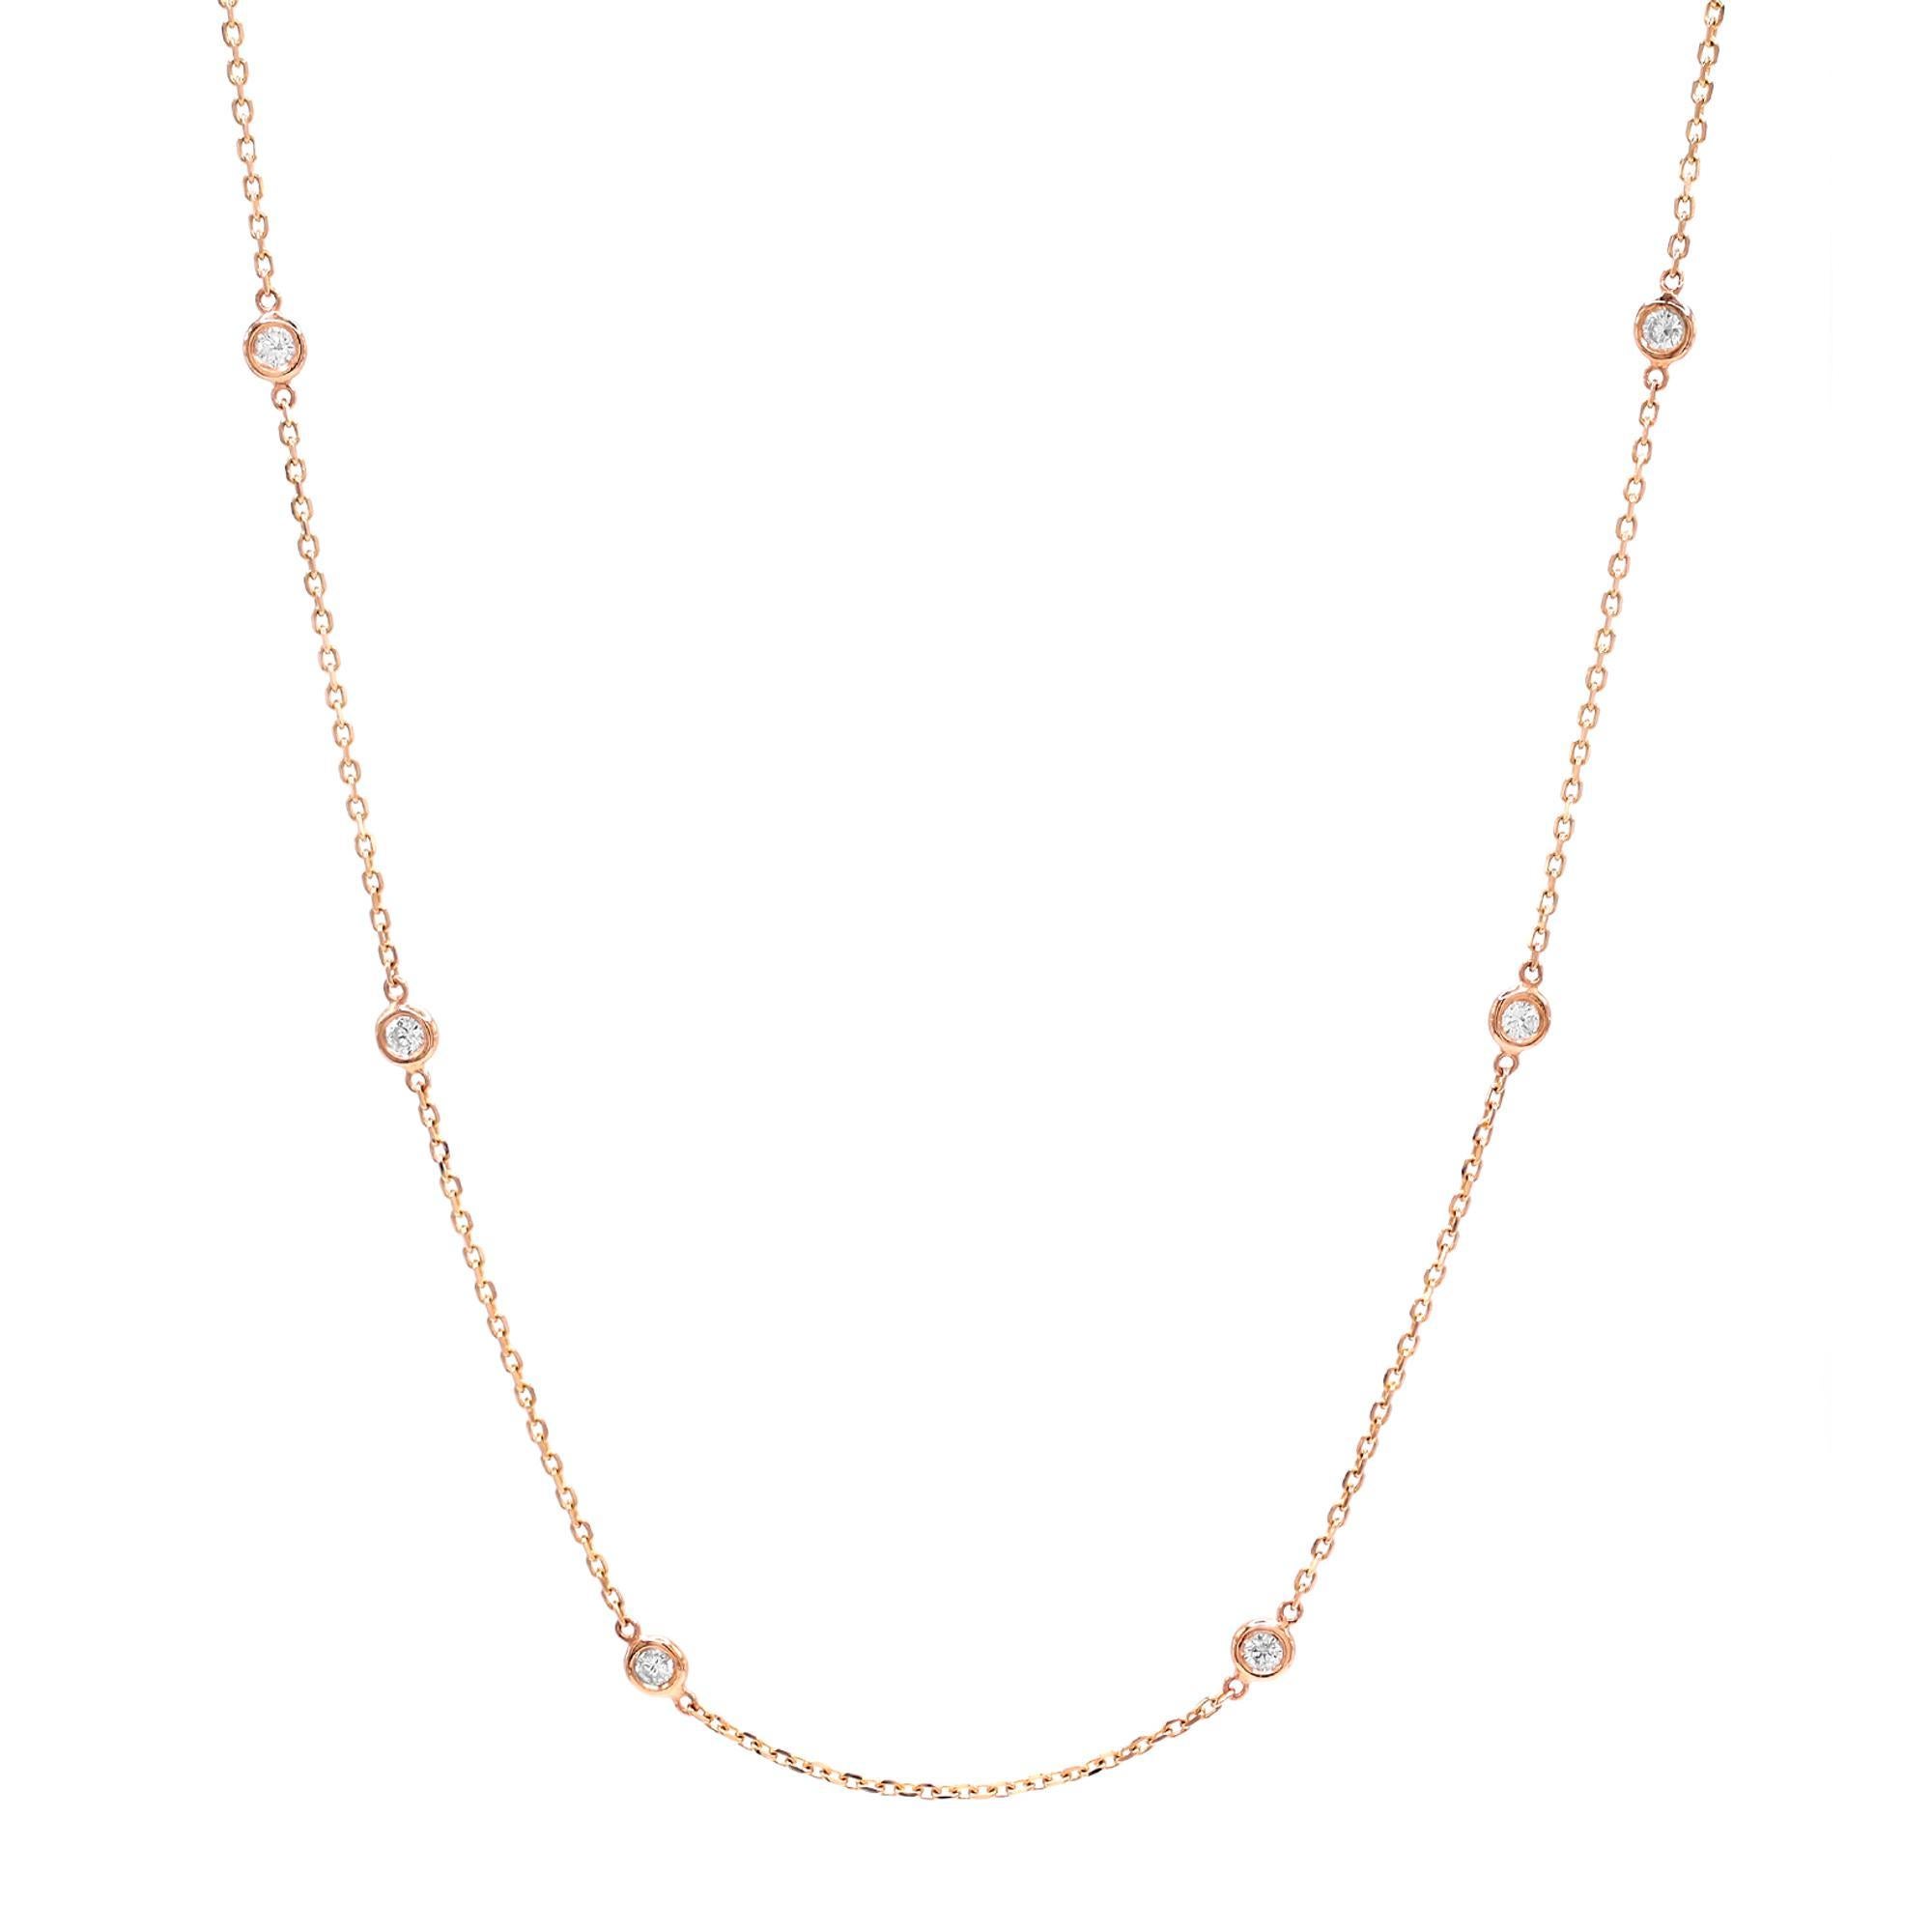 Round Cut Rachel Koen Natural Diamond by the Yard Necklace 14K Rose Gold 0.61cttw For Sale